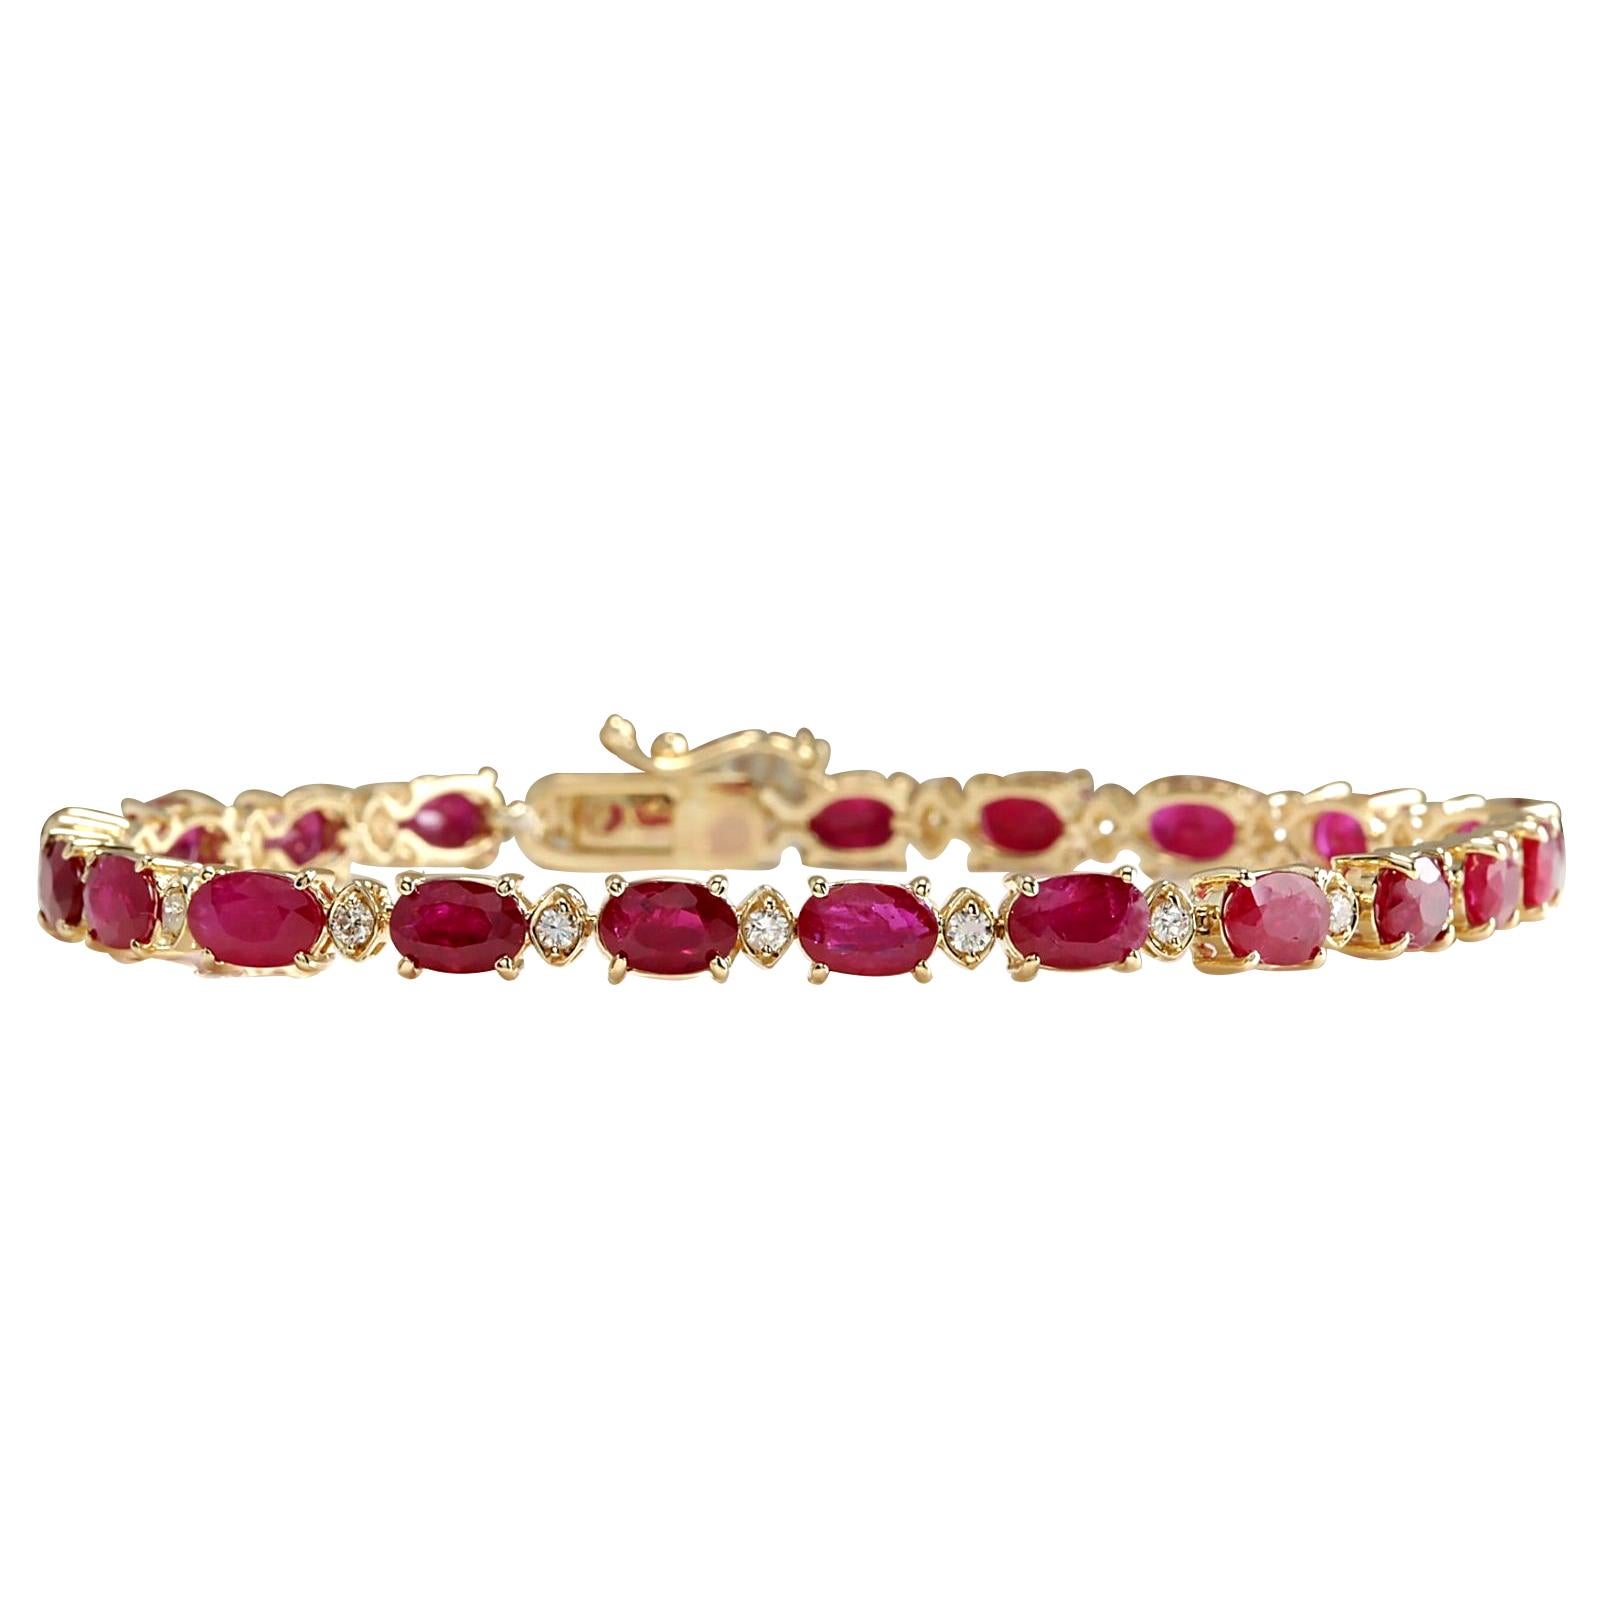 Introducing our exquisite 14.56 Carat Natural Ruby 14 Karat Yellow Gold Diamond Bracelet, a radiant statement piece exuding elegance and sophistication.
Indulge in luxury with our Natural Ruby Diamond Bracelet, a stunning addition to any jewelry